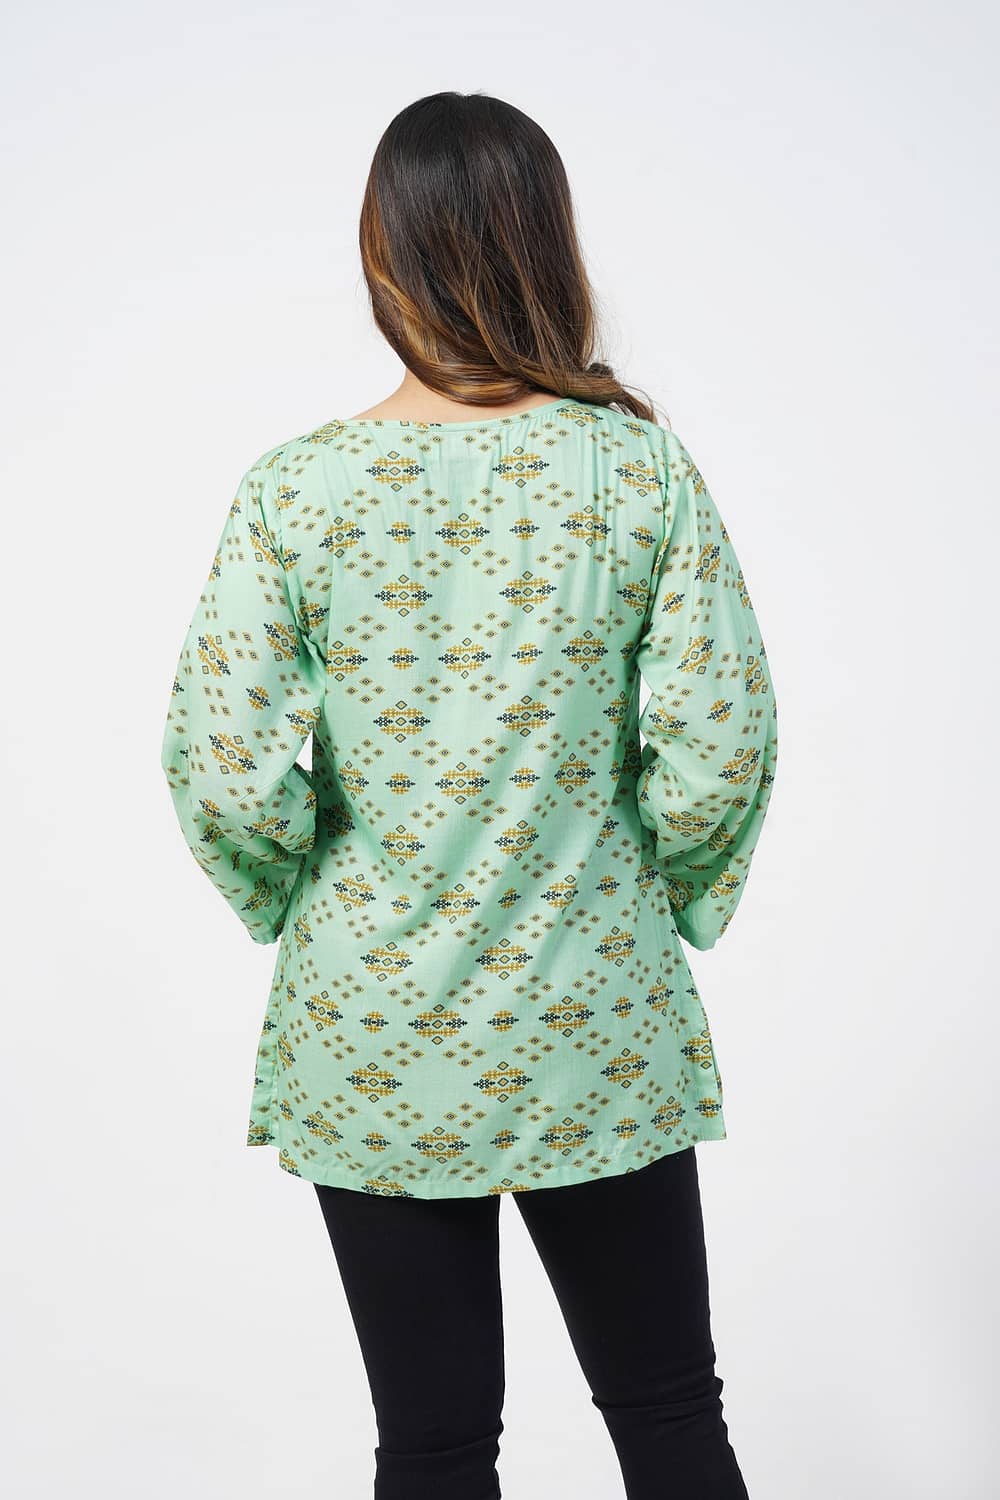 Sequence Green Top - 2